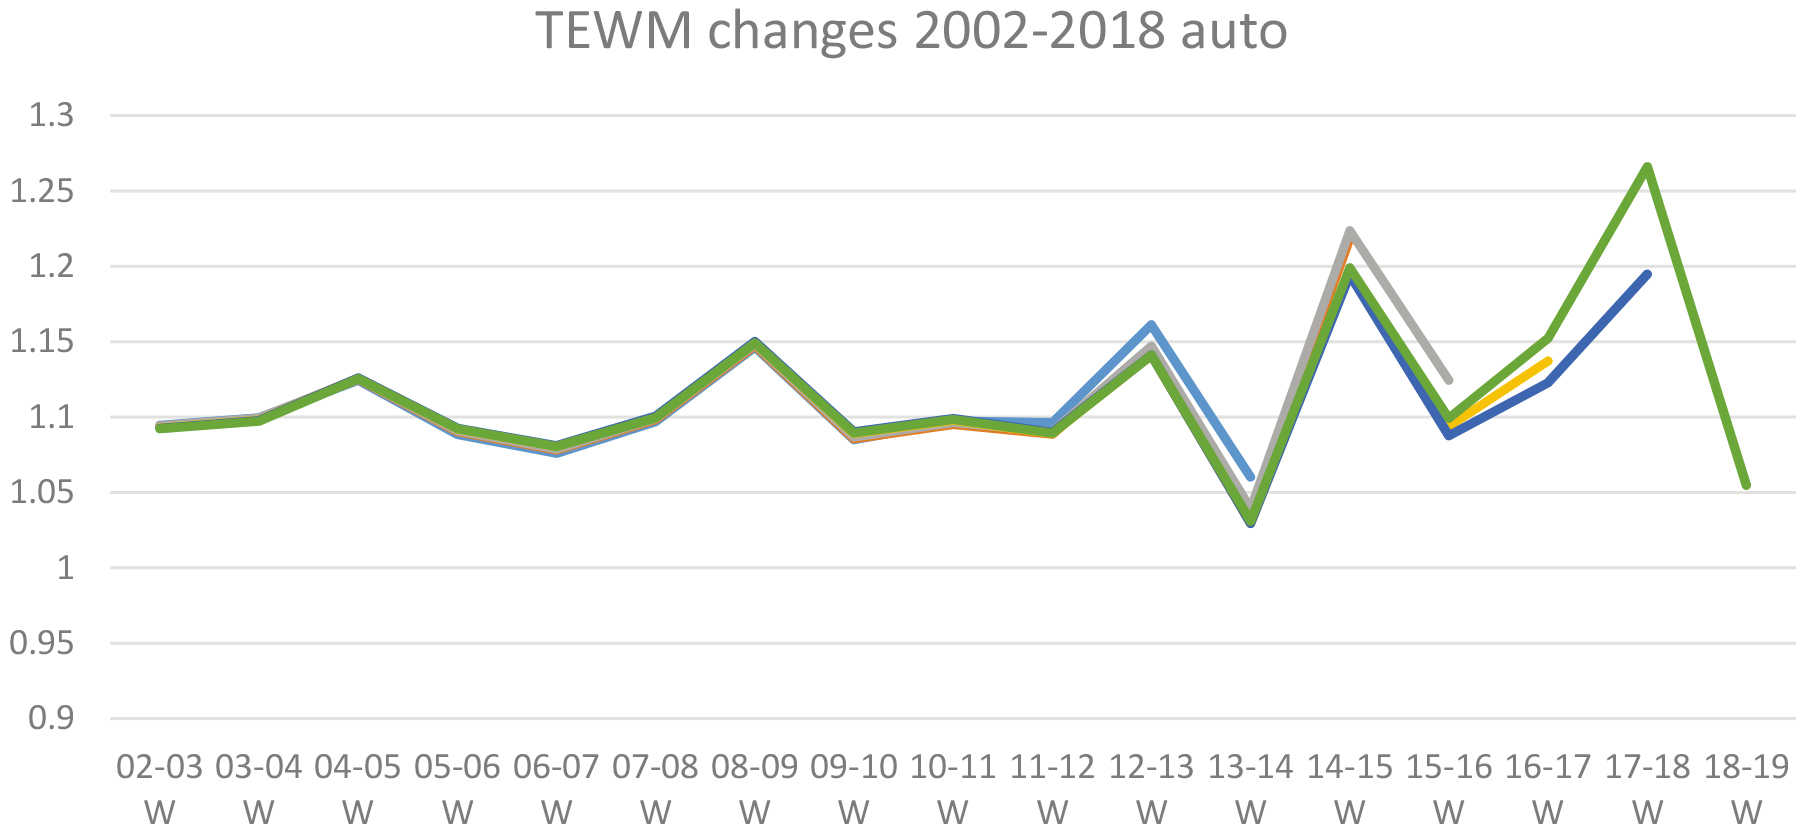 Estimated TEWM series as it evolves from first publication in 2002-3, using automatic outlier detection. Each shade represents a different vintage of the series, and where they overlie each other revisions are minimal.